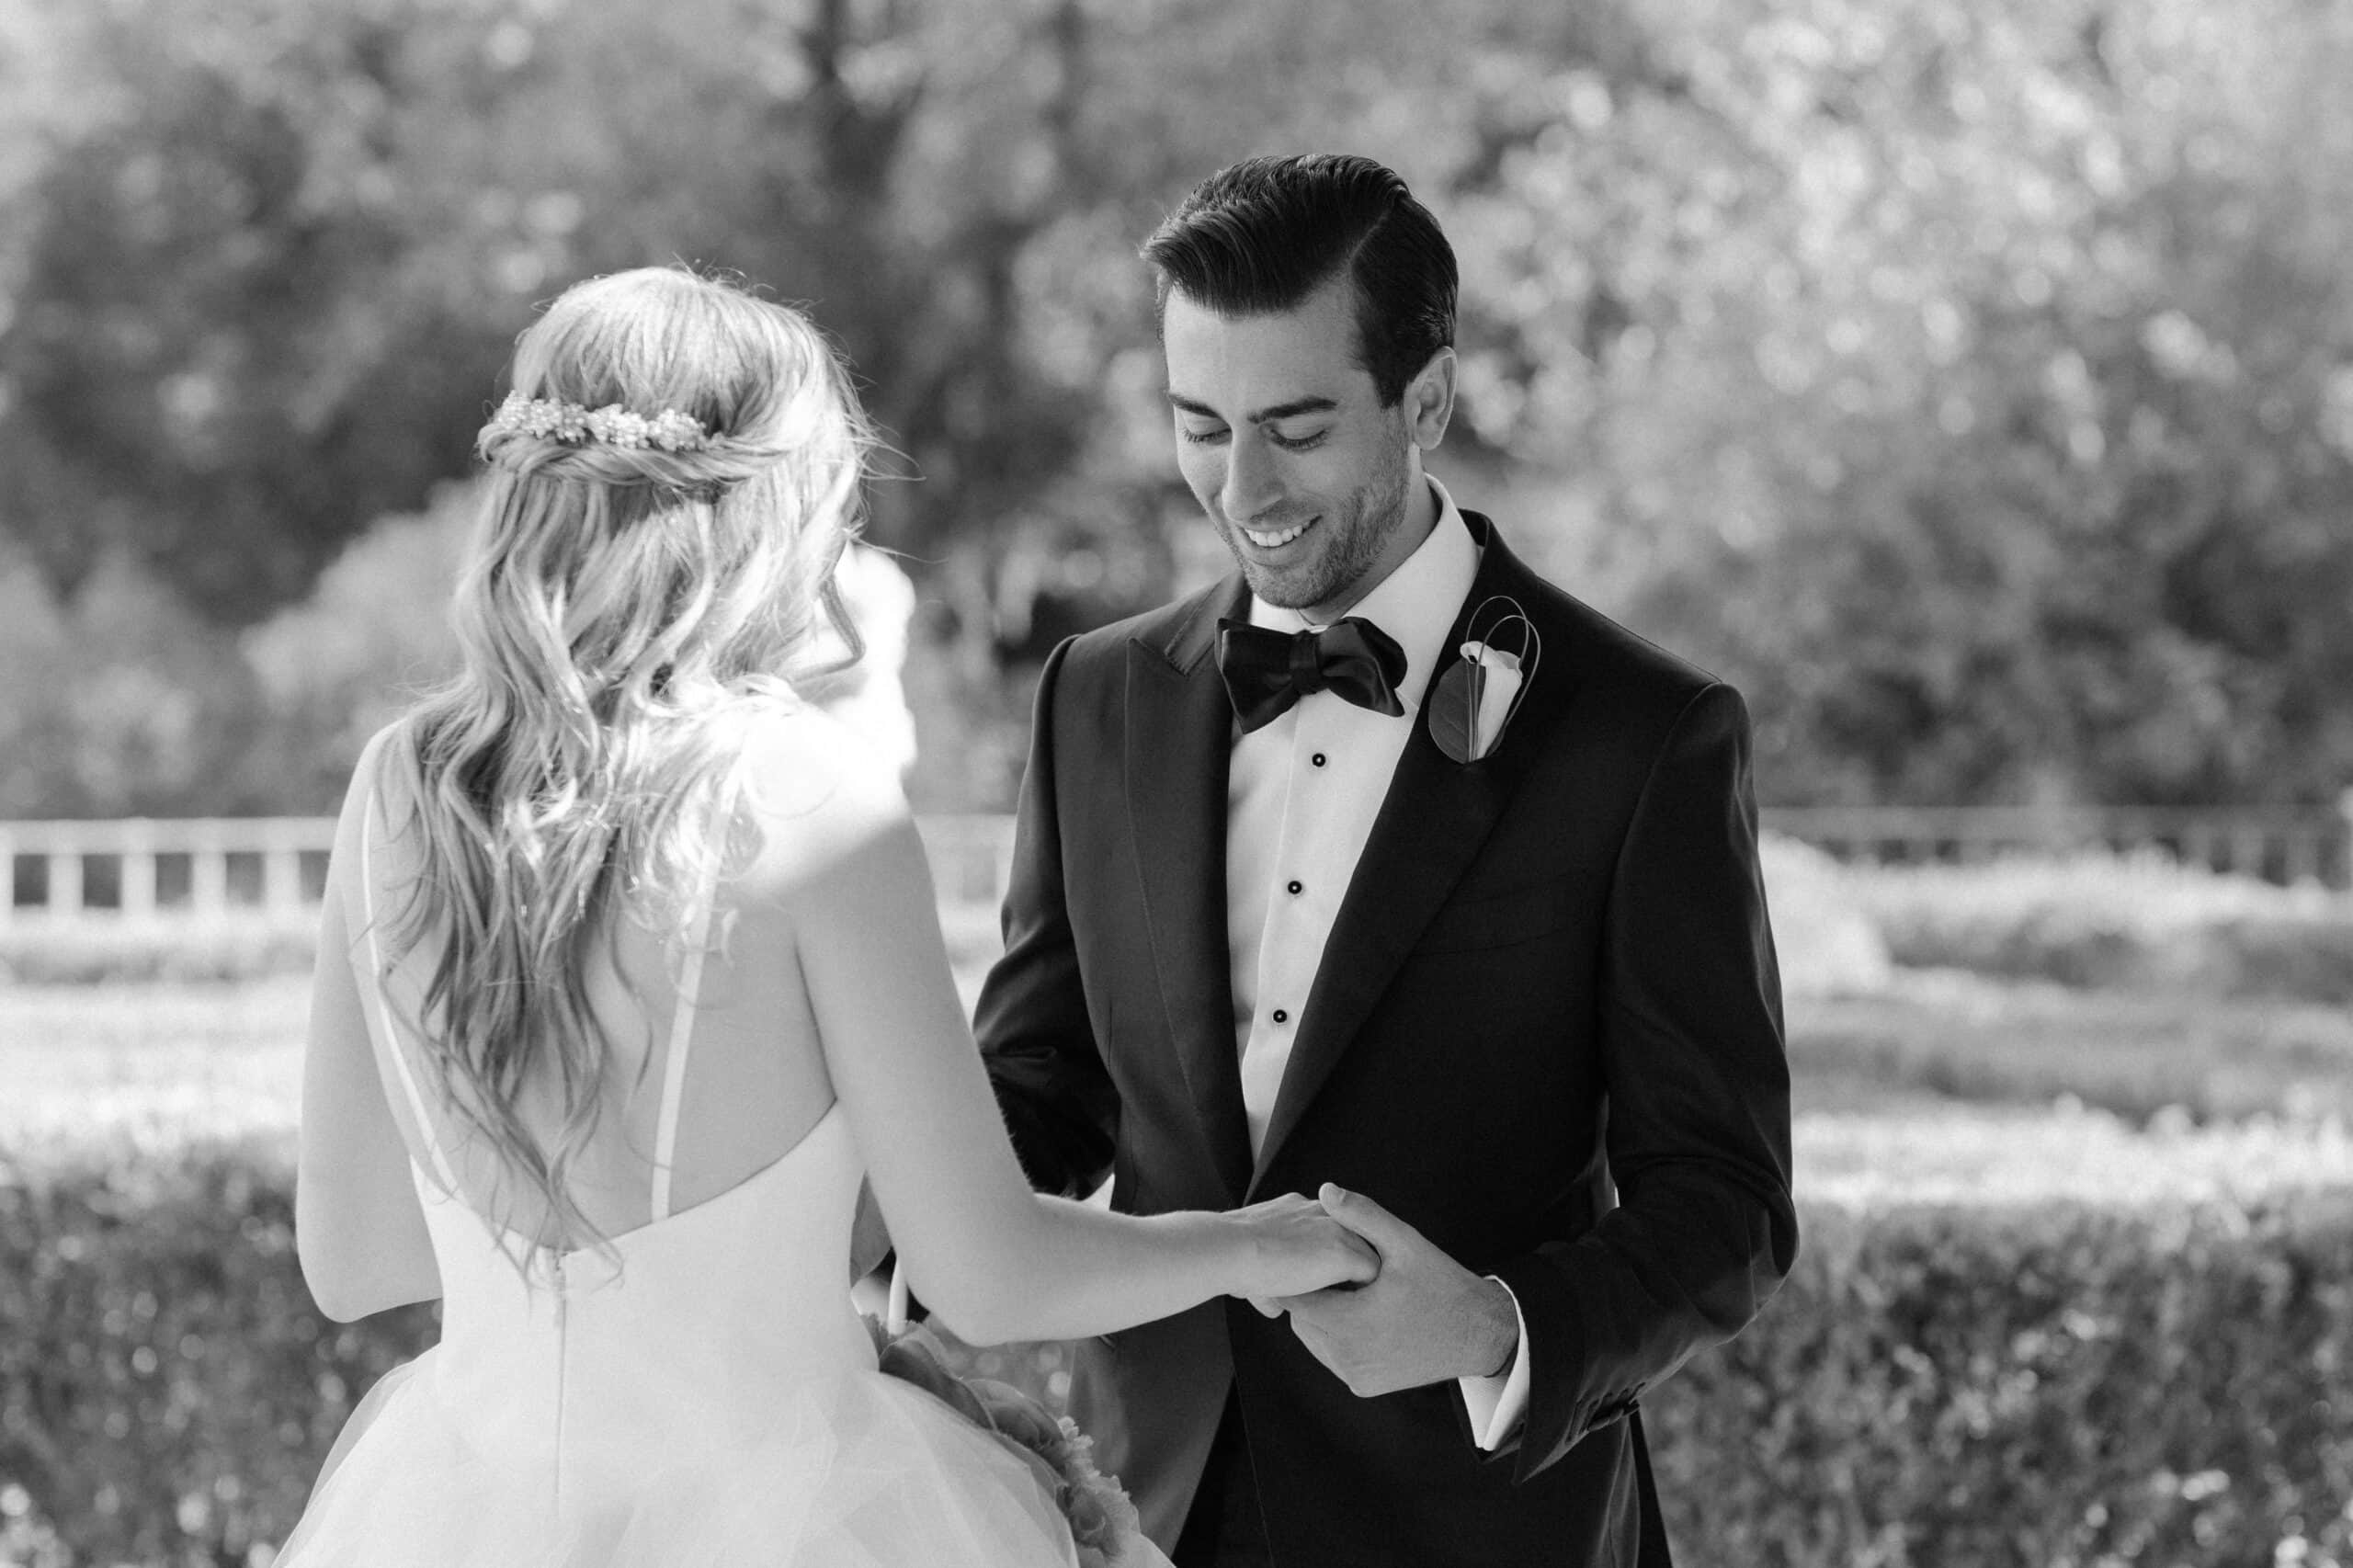 Groom smiling at his bride during a poignant First Look in monochrome elegance.